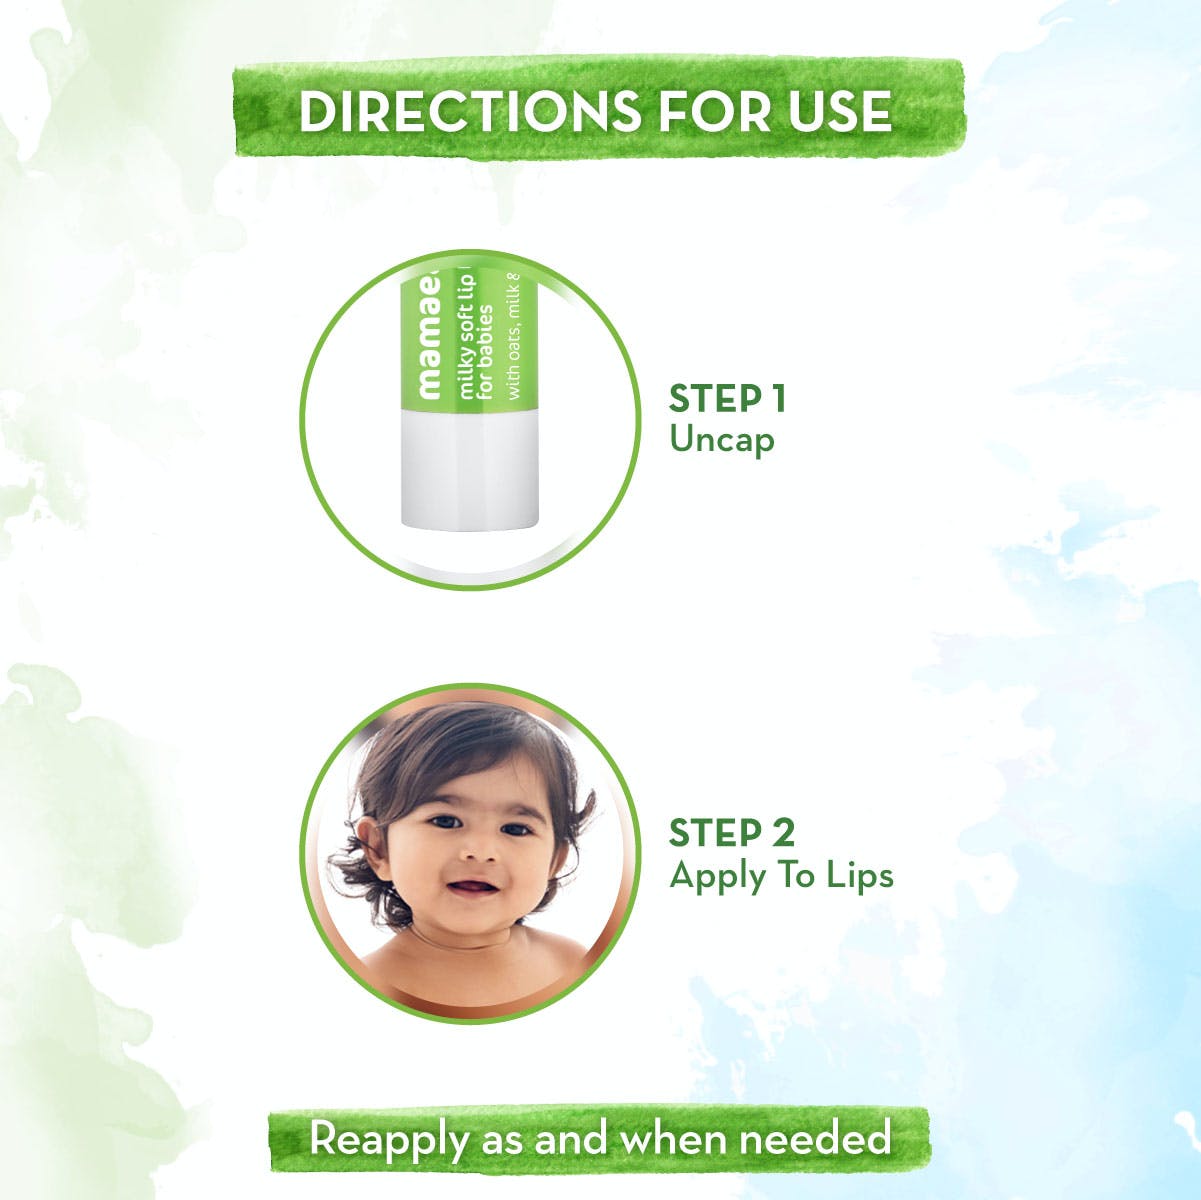 Mamaearth 100% Natural Milky Soft Lip Balm for Kids, Babies for 12 Hour Moisturization, with Oats, Milk and Calendula 4 gm